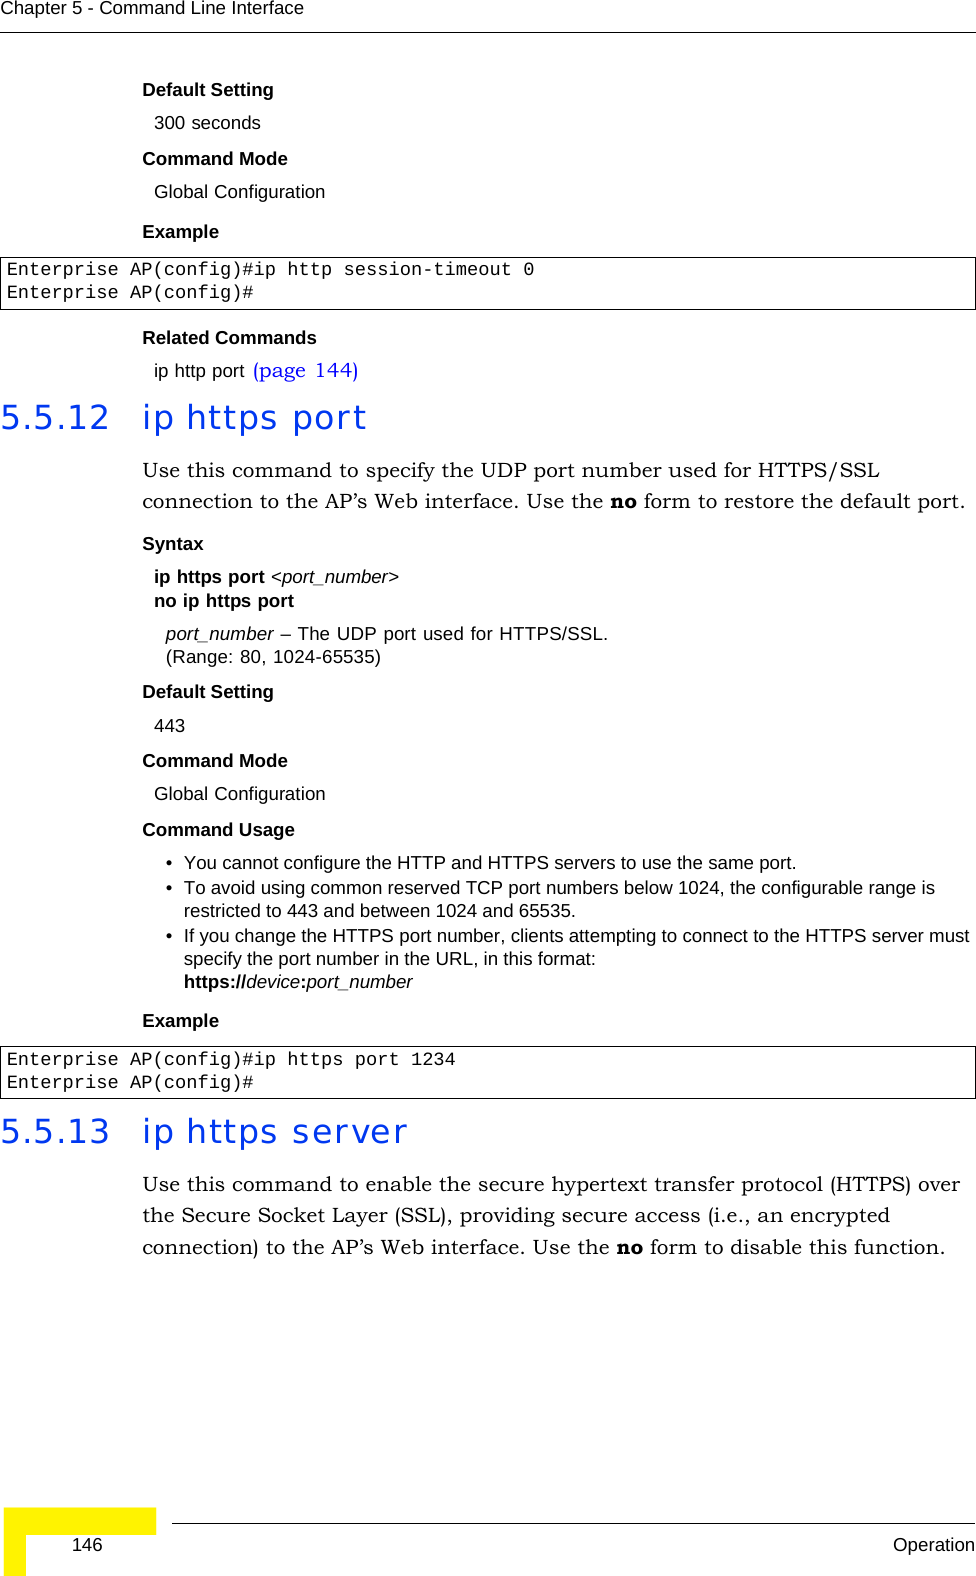  146 OperationChapter 5 - Command Line InterfaceDefault Setting 300 secondsCommand Mode Global ConfigurationExample Related Commandsip http port (page 144)5.5.12 ip https portUse this command to specify the UDP port number used for HTTPS/SSL connection to the AP’s Web interface. Use the no form to restore the default port.Syntax ip https port &lt;port_number&gt;no ip https portport_number – The UDP port used for HTTPS/SSL. (Range: 80, 1024-65535)Default Setting 443Command Mode Global ConfigurationCommand Usage • You cannot configure the HTTP and HTTPS servers to use the same port.• To avoid using common reserved TCP port numbers below 1024, the configurable range is restricted to 443 and between 1024 and 65535. • If you change the HTTPS port number, clients attempting to connect to the HTTPS server must specify the port number in the URL, in this format:https://device:port_numberExample 5.5.13 ip https serverUse this command to enable the secure hypertext transfer protocol (HTTPS) over the Secure Socket Layer (SSL), providing secure access (i.e., an encrypted connection) to the AP’s Web interface. Use the no form to disable this function.Enterprise AP(config)#ip http session-timeout 0Enterprise AP(config)#Enterprise AP(config)#ip https port 1234Enterprise AP(config)#